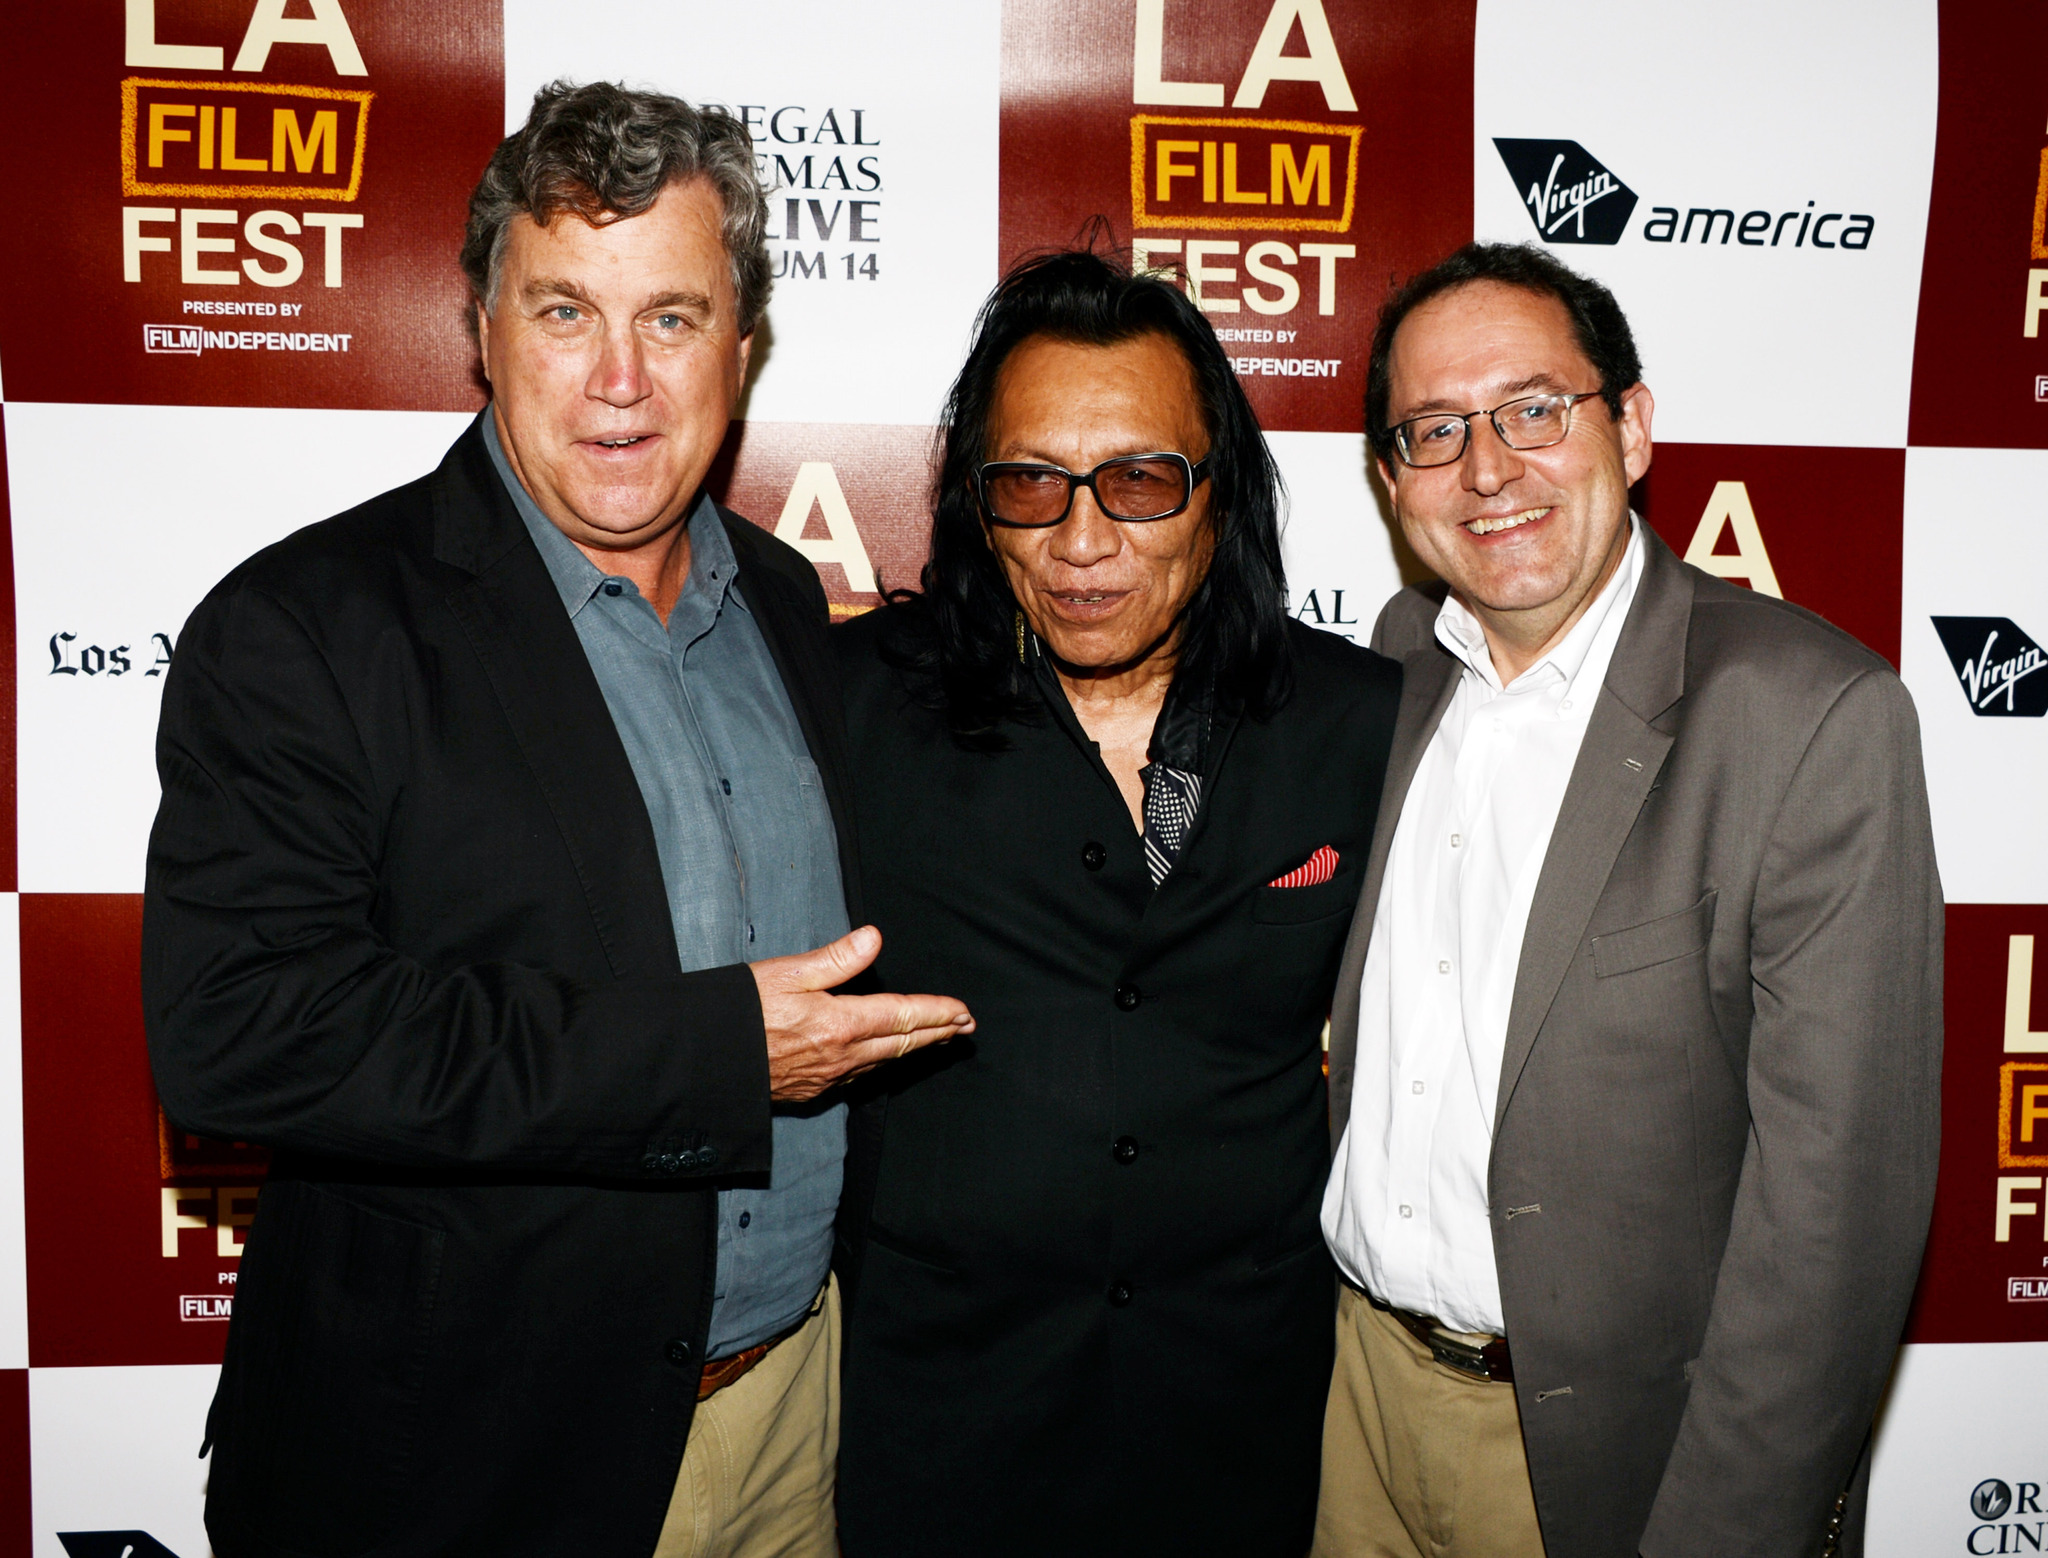 Tom Bernard, Michael Barker and Rodriguez at event of Searching for Sugar Man (2012)